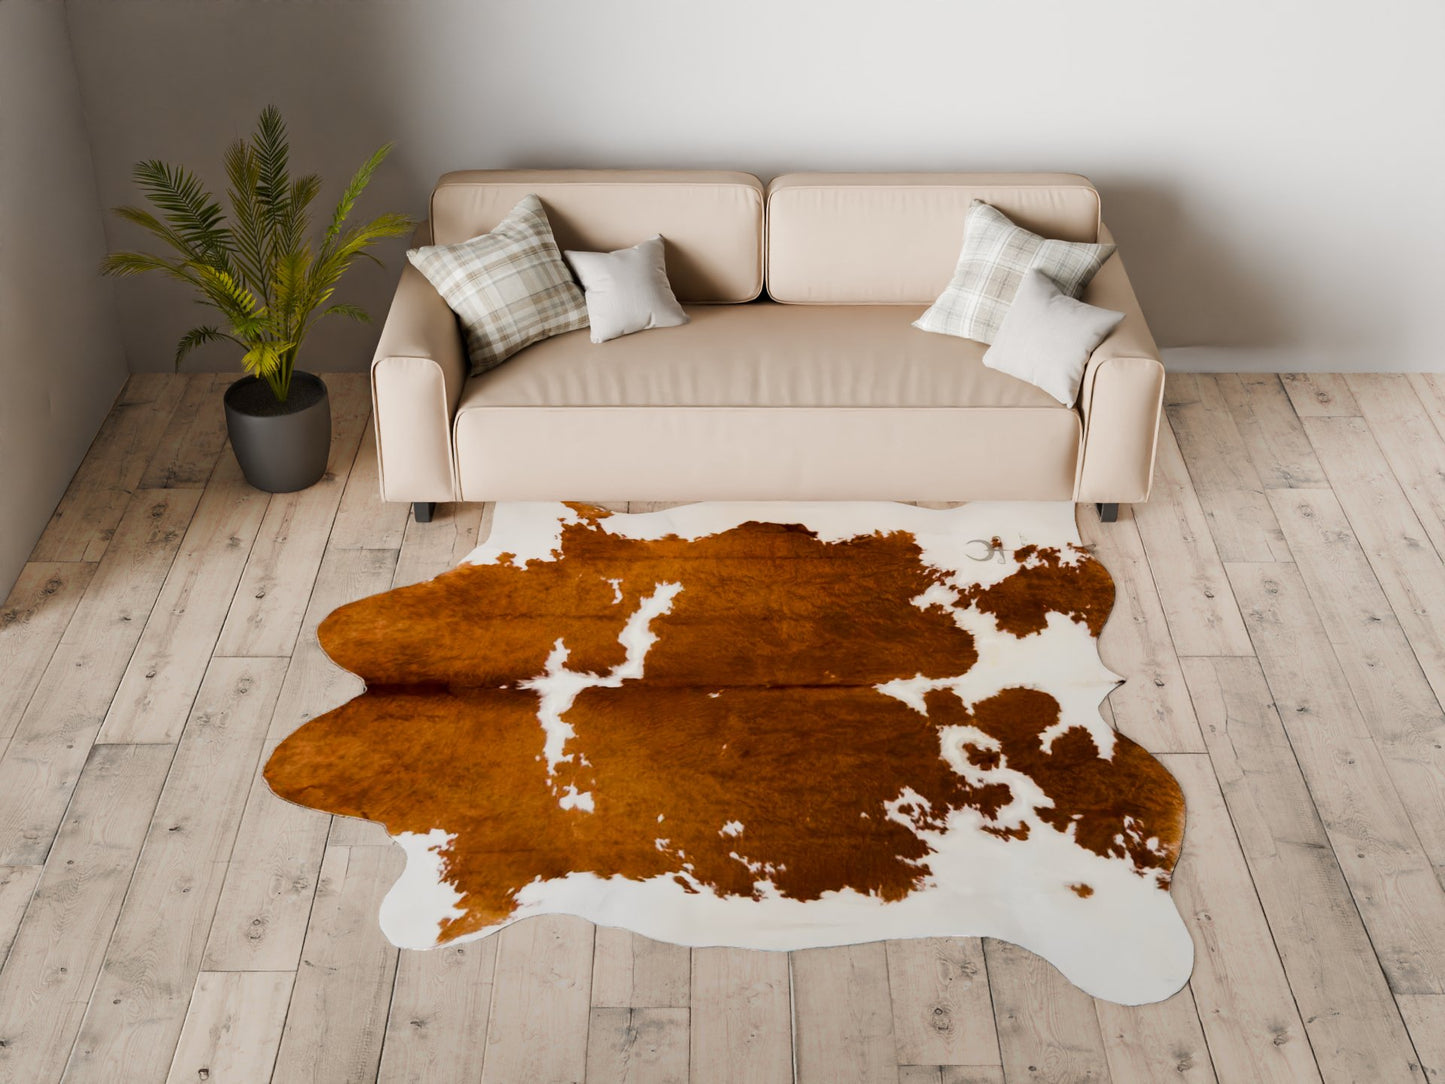 Extra Large Brown and White Cowhide Rug Size 8.1x7.9 ft---4654 - Rodeo Cowhide Rugs